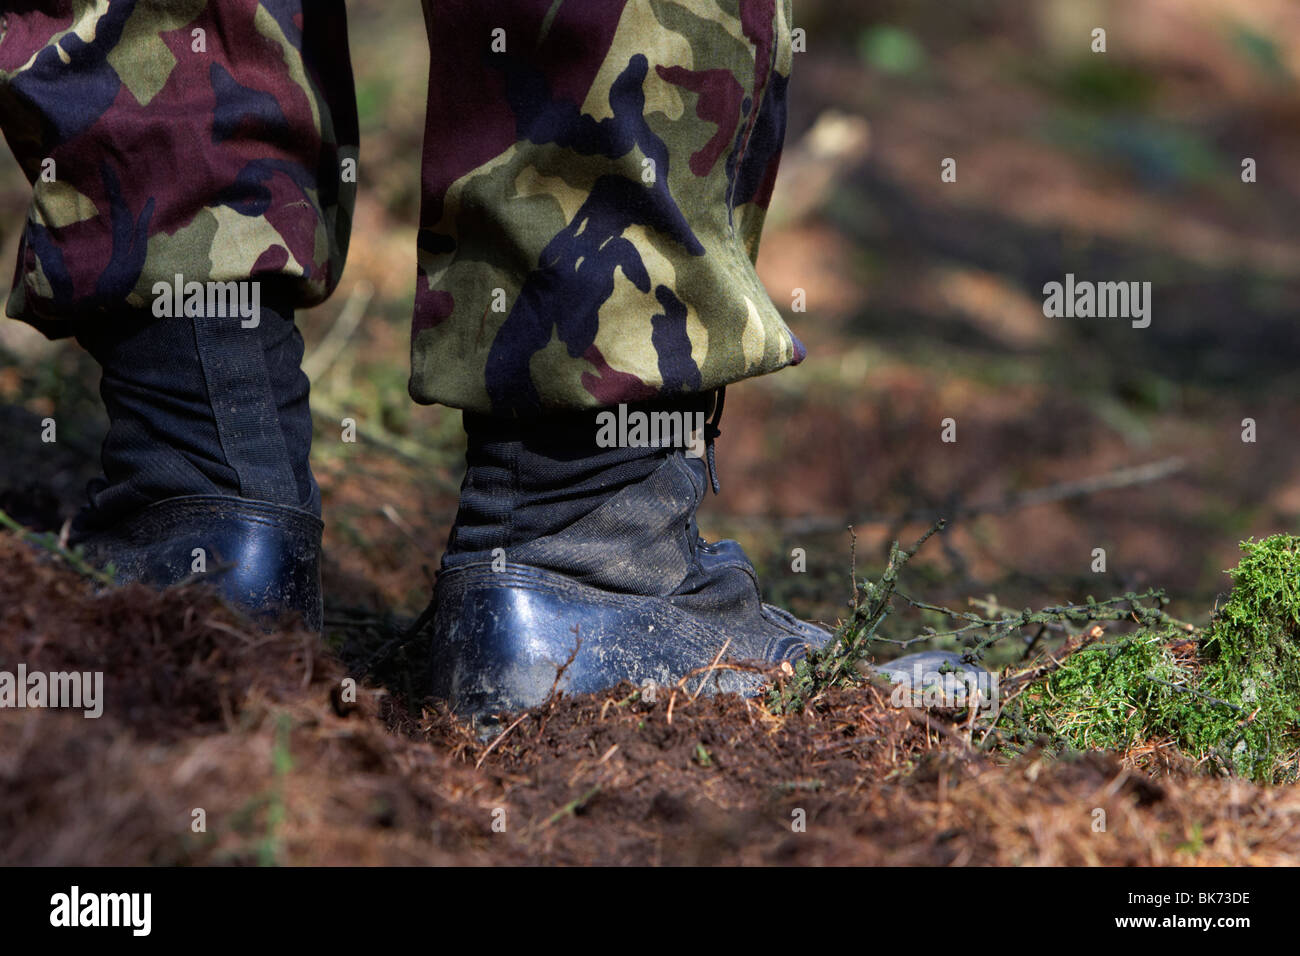 man wearing camouflage combat trousers and boots standing in a forest in the uk Stock Photo